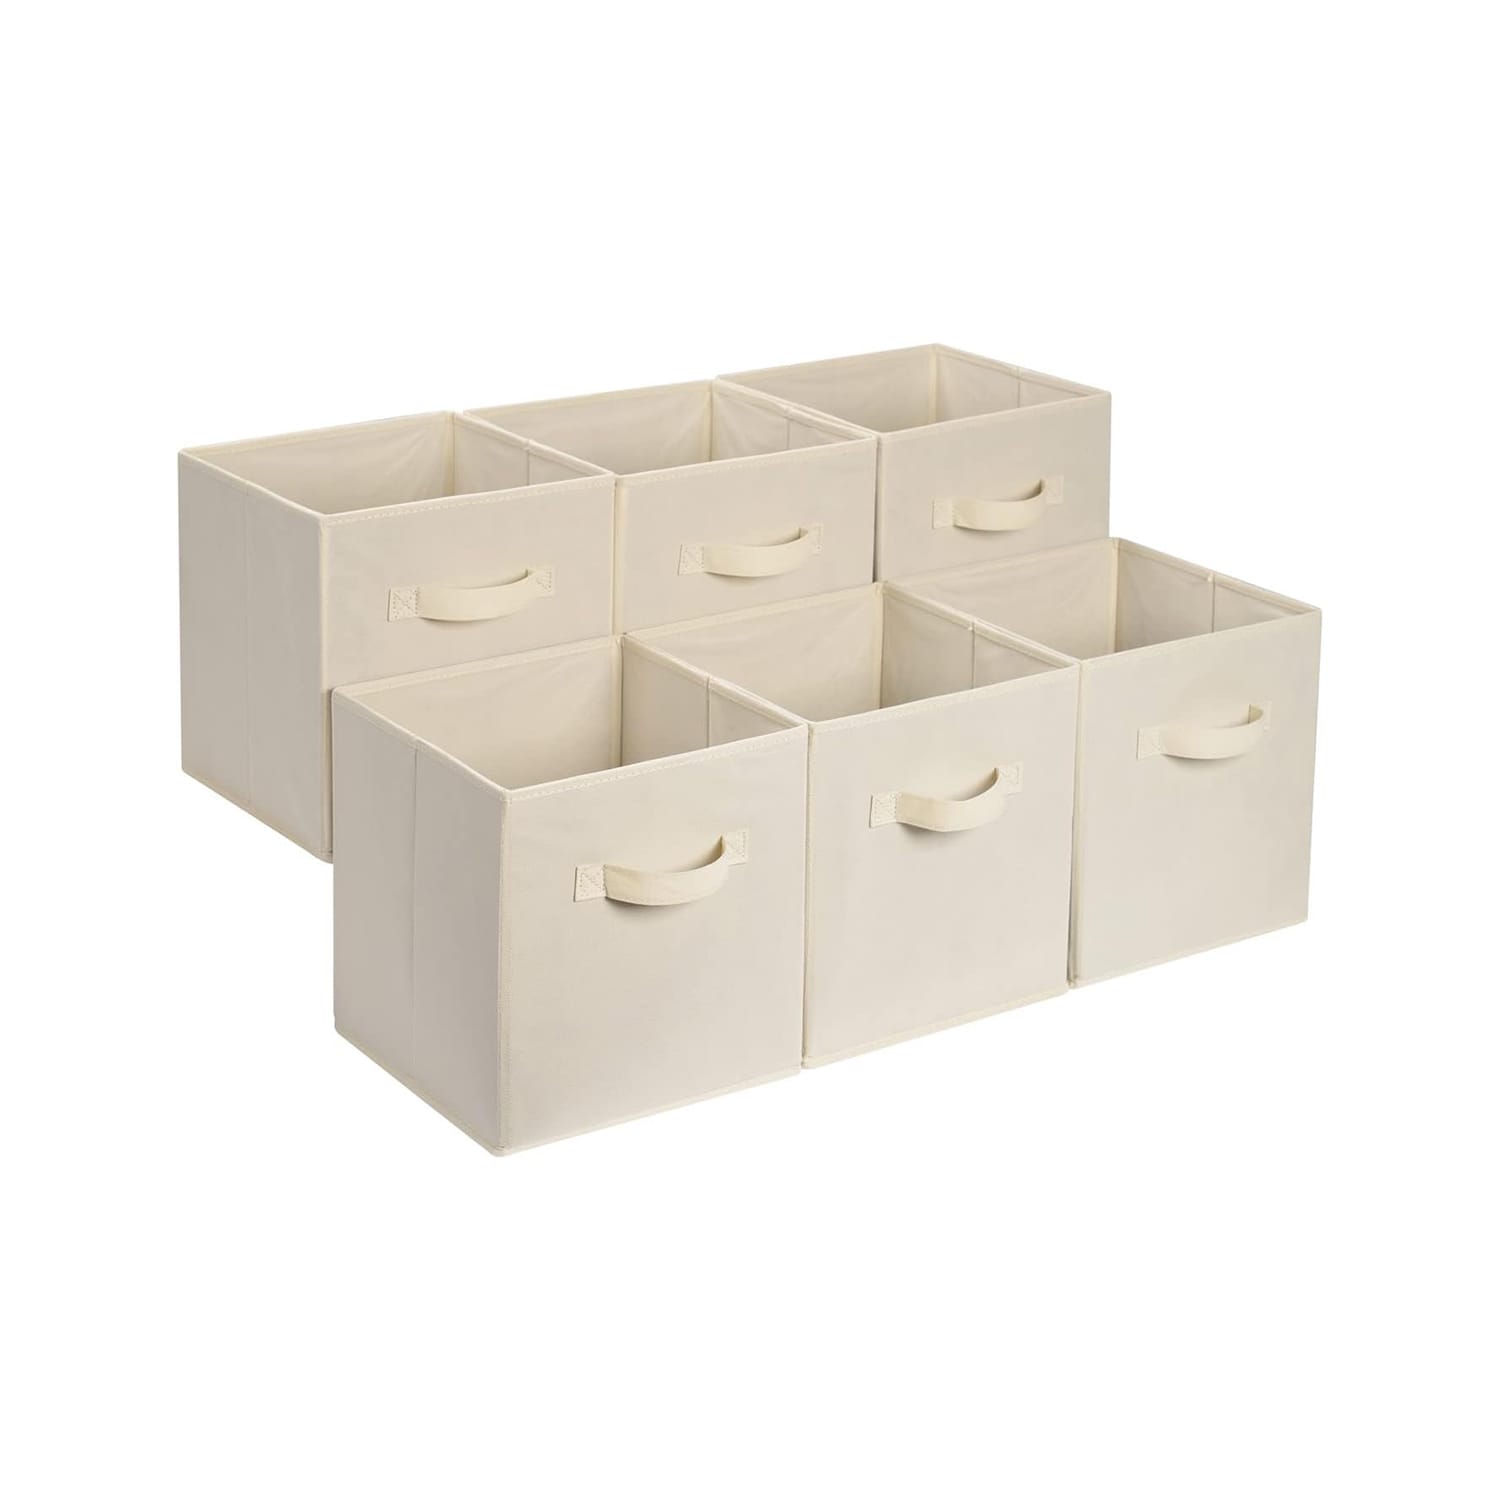 Best Craft Organizer K3 Two 3 inch and Two 2 inch Storage Drawers for The IKEA KALLAX Unit